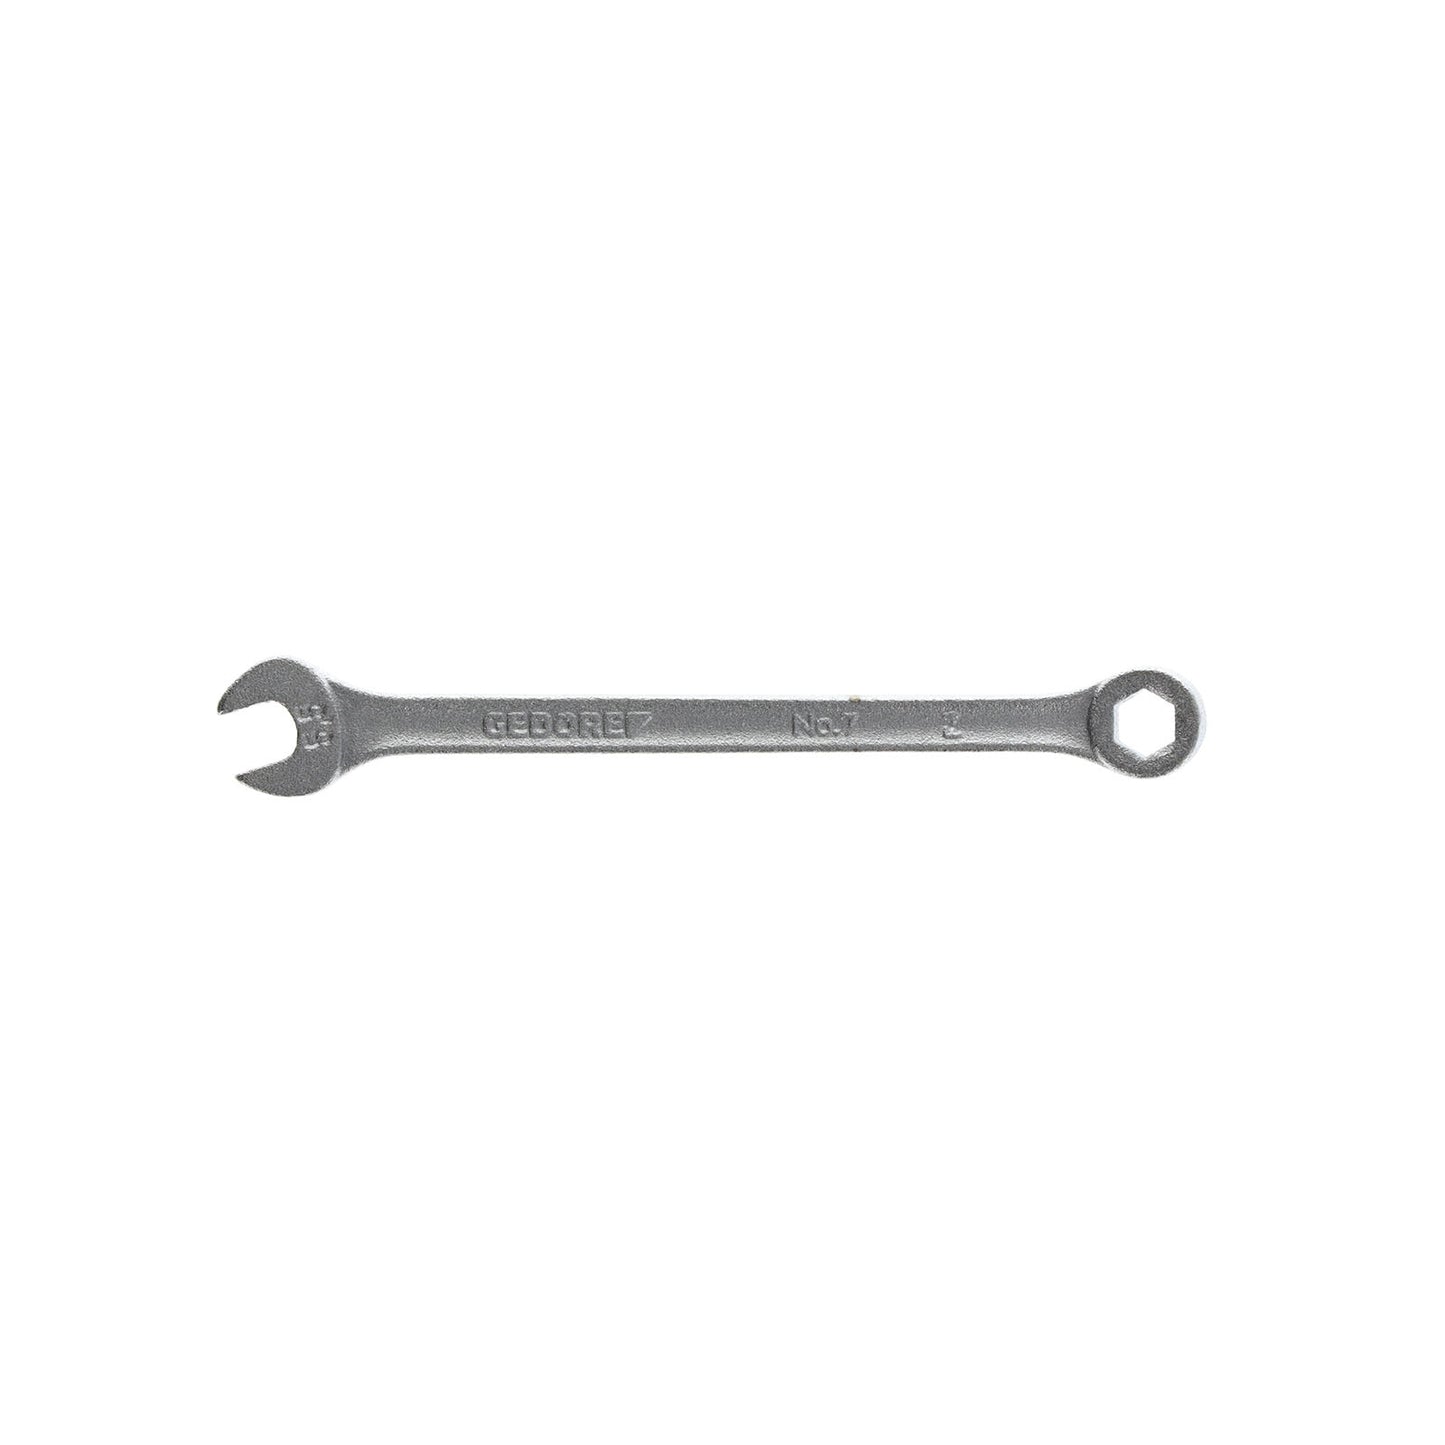 GEDORE 7 5.5 - Combination Wrench, 5.5 mm (6081220)